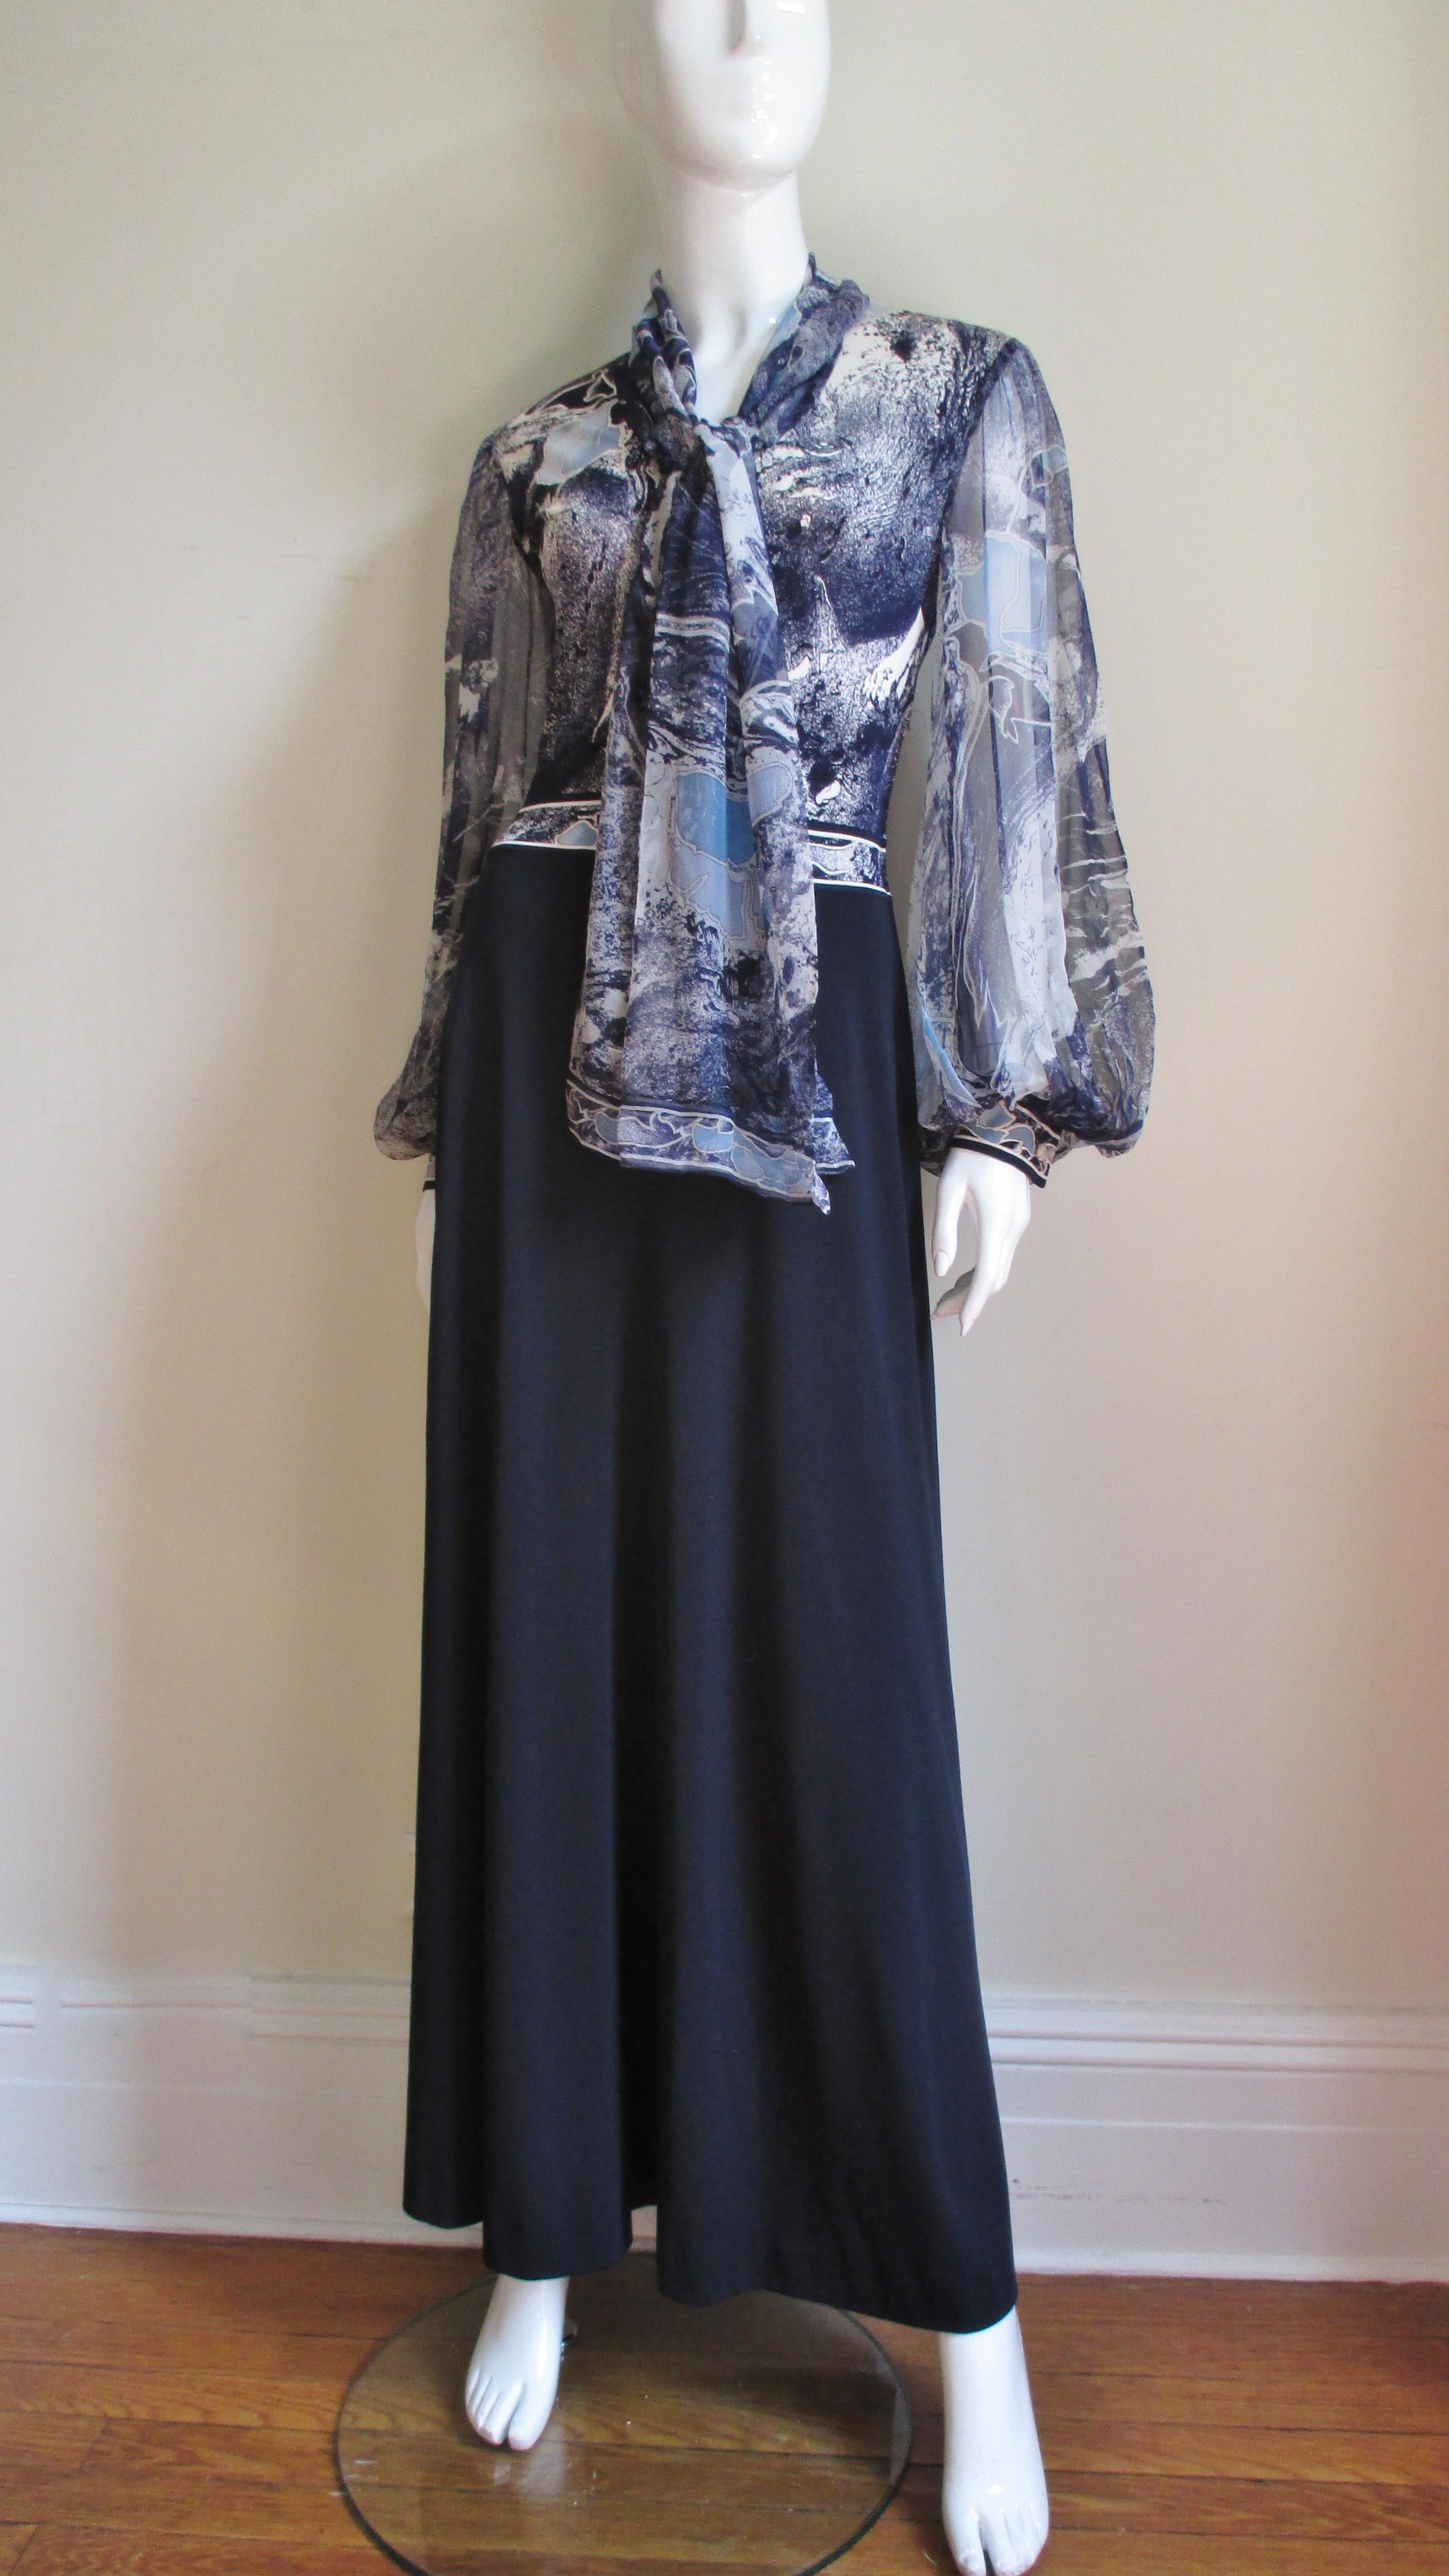 A beautiful jersey maxi dress from Leonard, Paris. The silk bodice is in an abstract blues and off white print with large flowers.  It has ties at the neck and semi sheer full billowing sleeves.  The cuffs and center front bodice close with small